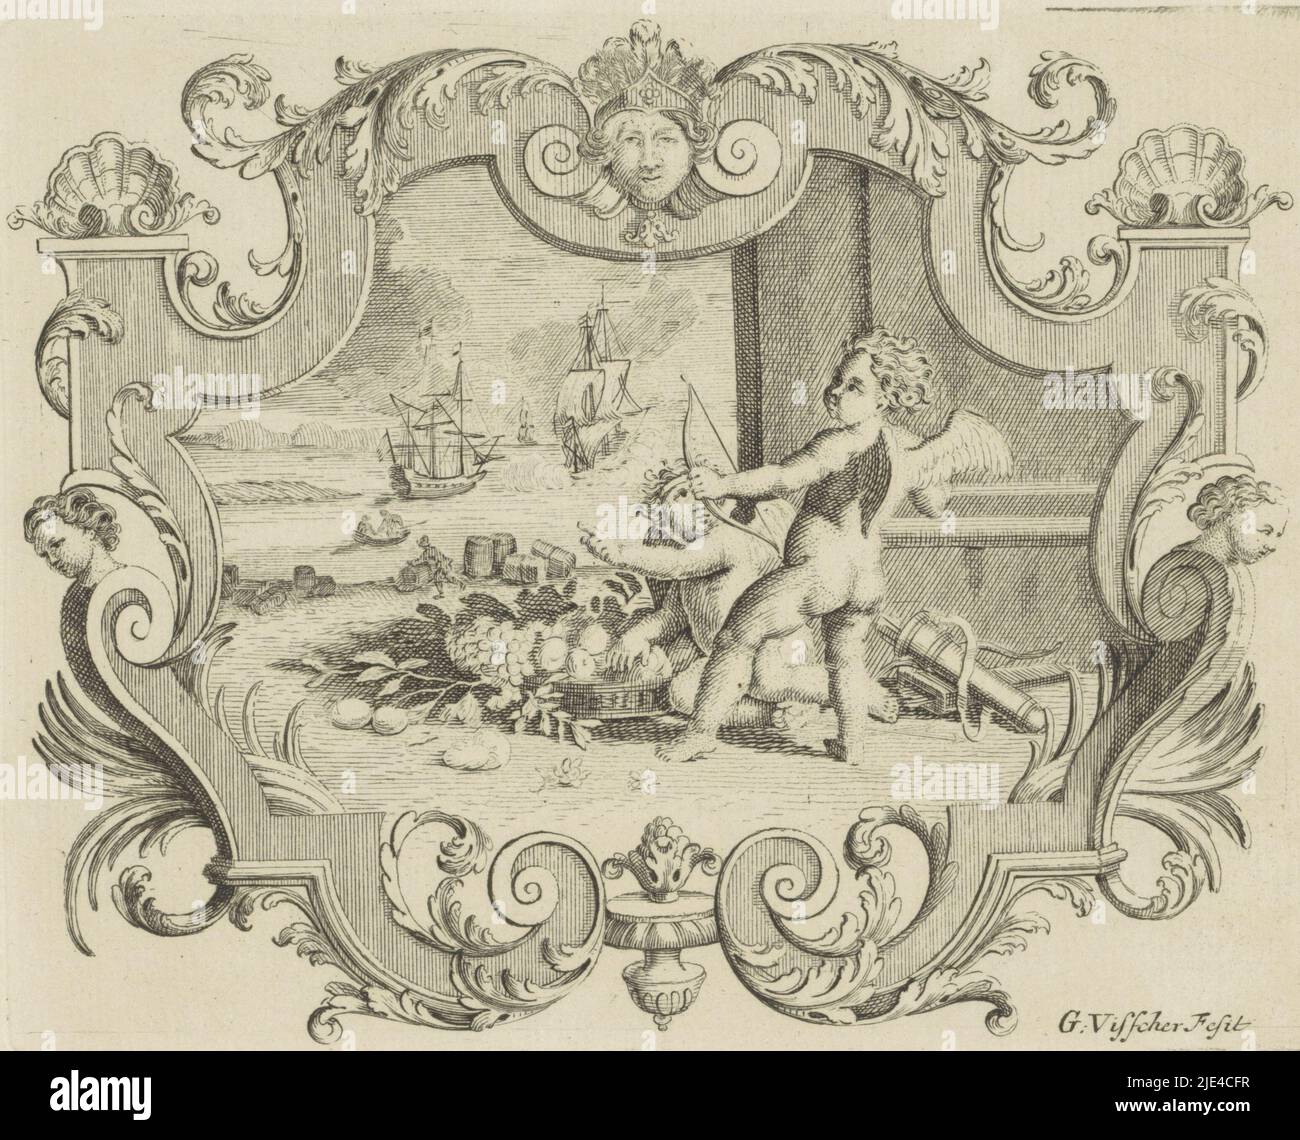 Amor and putto on a beach, Gerrit Visscher, 1690 - 1710, Amor with bow and putto by fruit basket on a beach. In the distance sailing ships at sea. The scene is framed in an ornamental frame., print maker: Gerrit Visscher, (mentioned on object), Amsterdam, 1690 - 1710, paper, engraving, etching, h 118 mm × w 151 mm Stock Photo